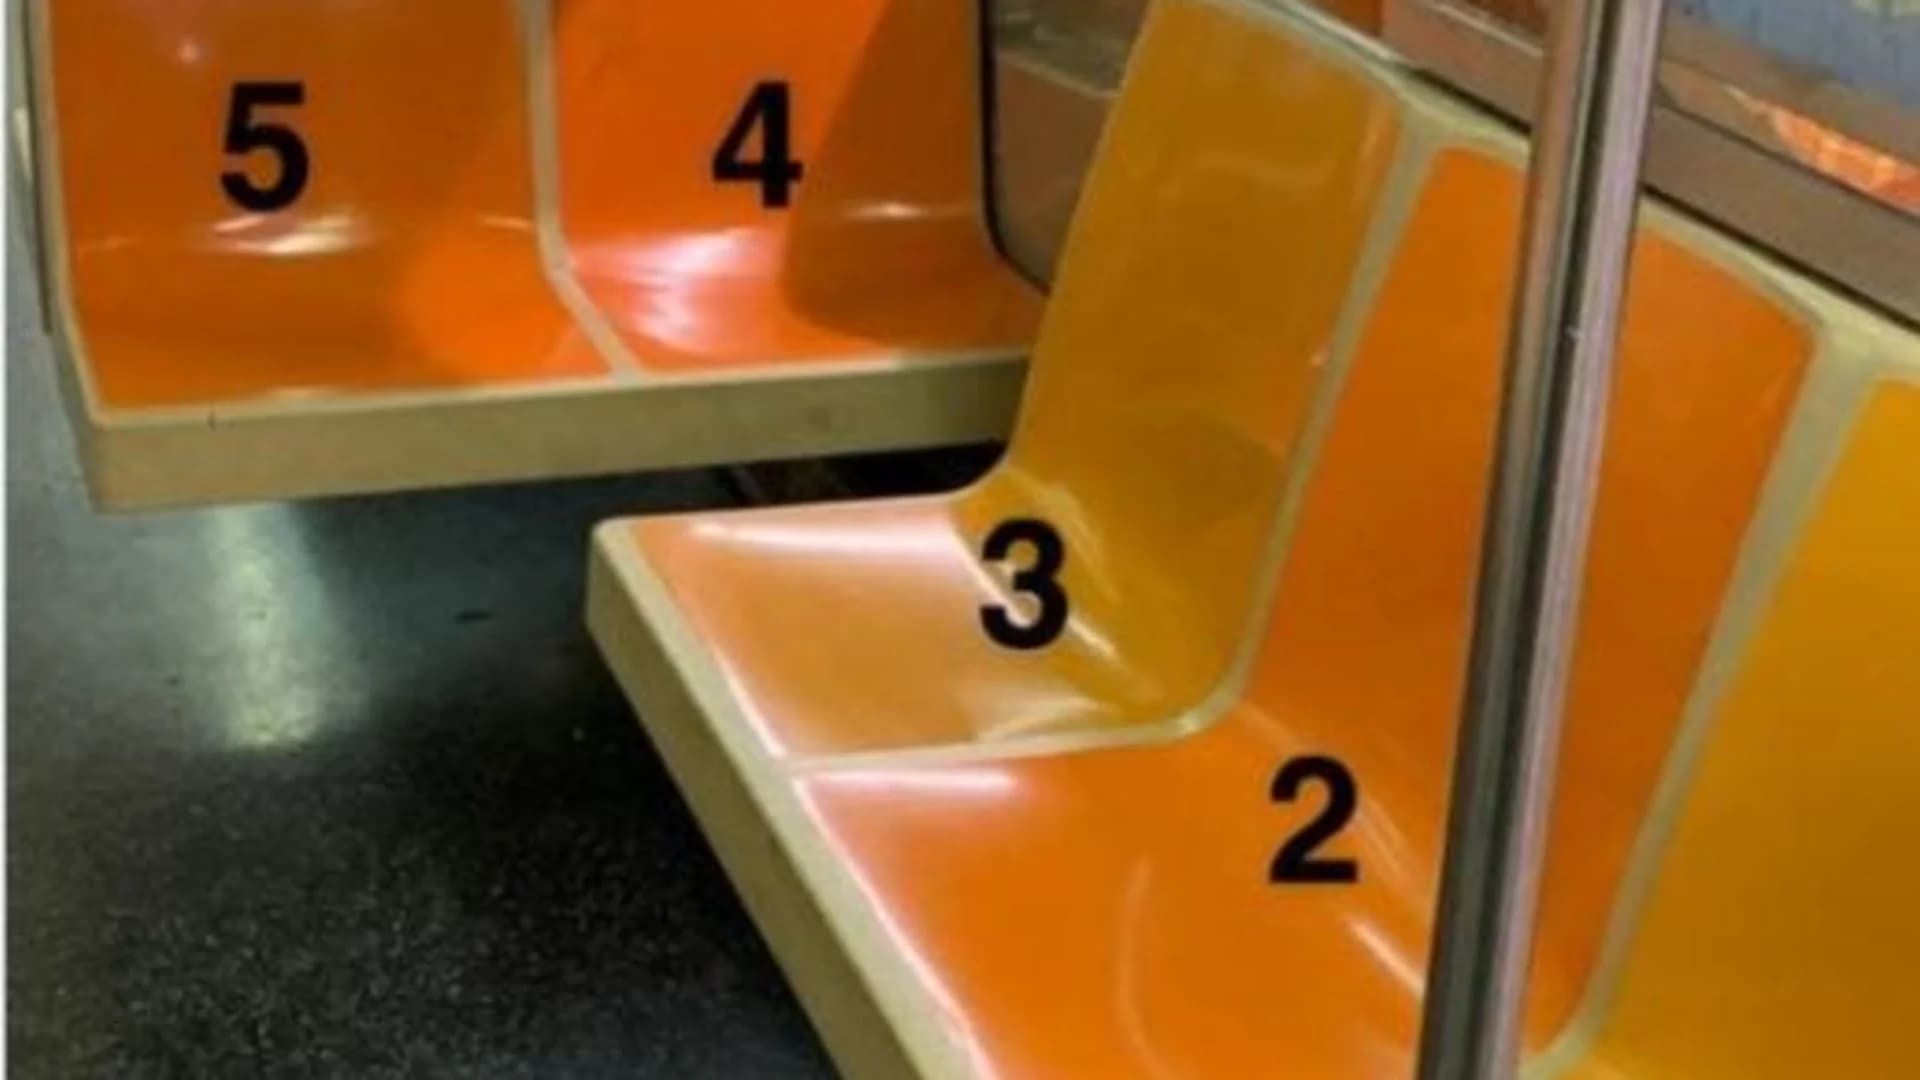 Tweet asking New Yorkers which seat on the train is best goes viral